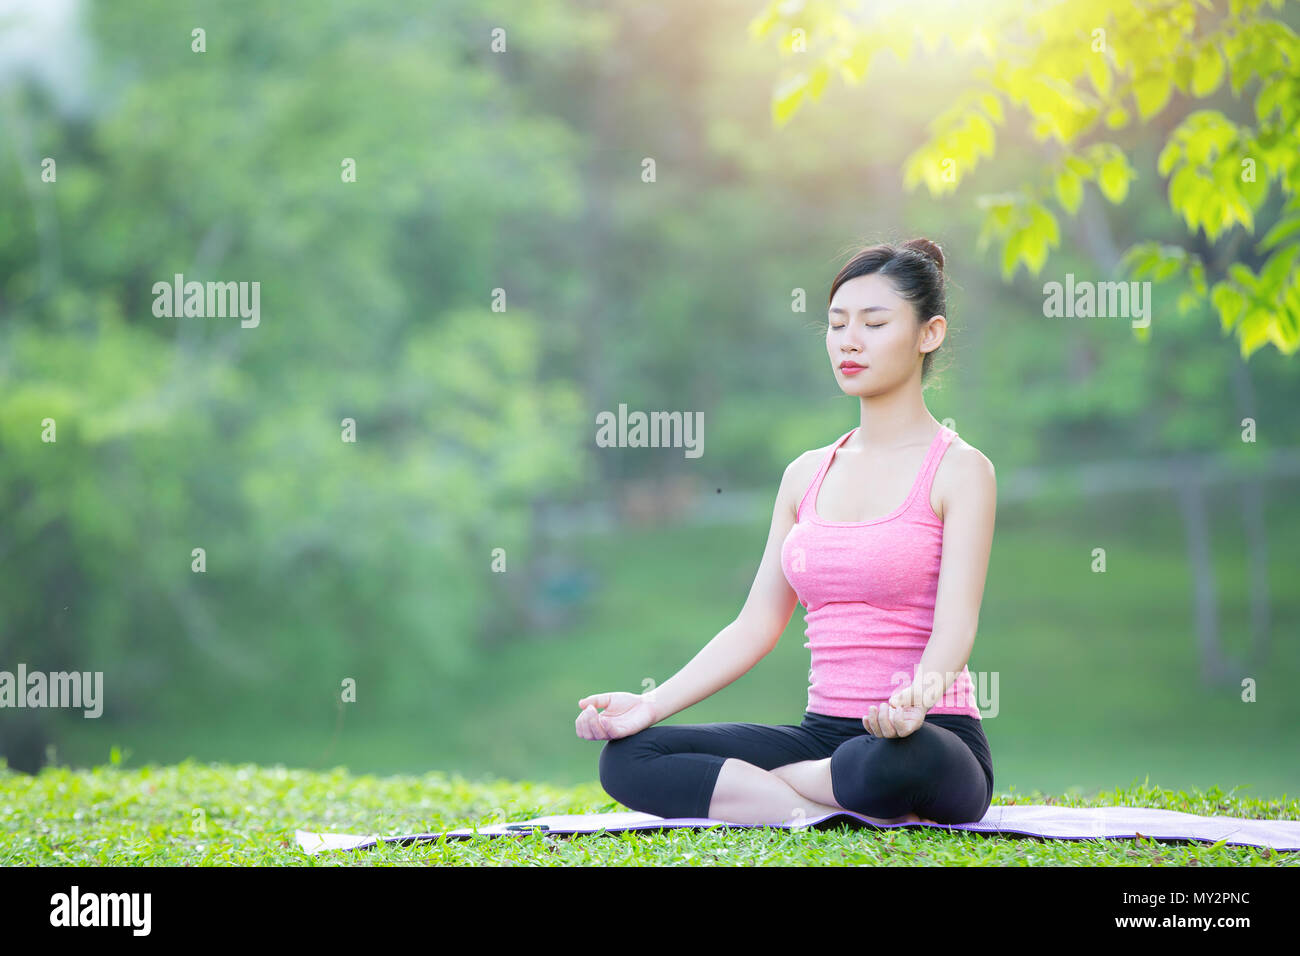 Yoga lady practicing in park outdoor, Meditation, Exercise. Stock Photo